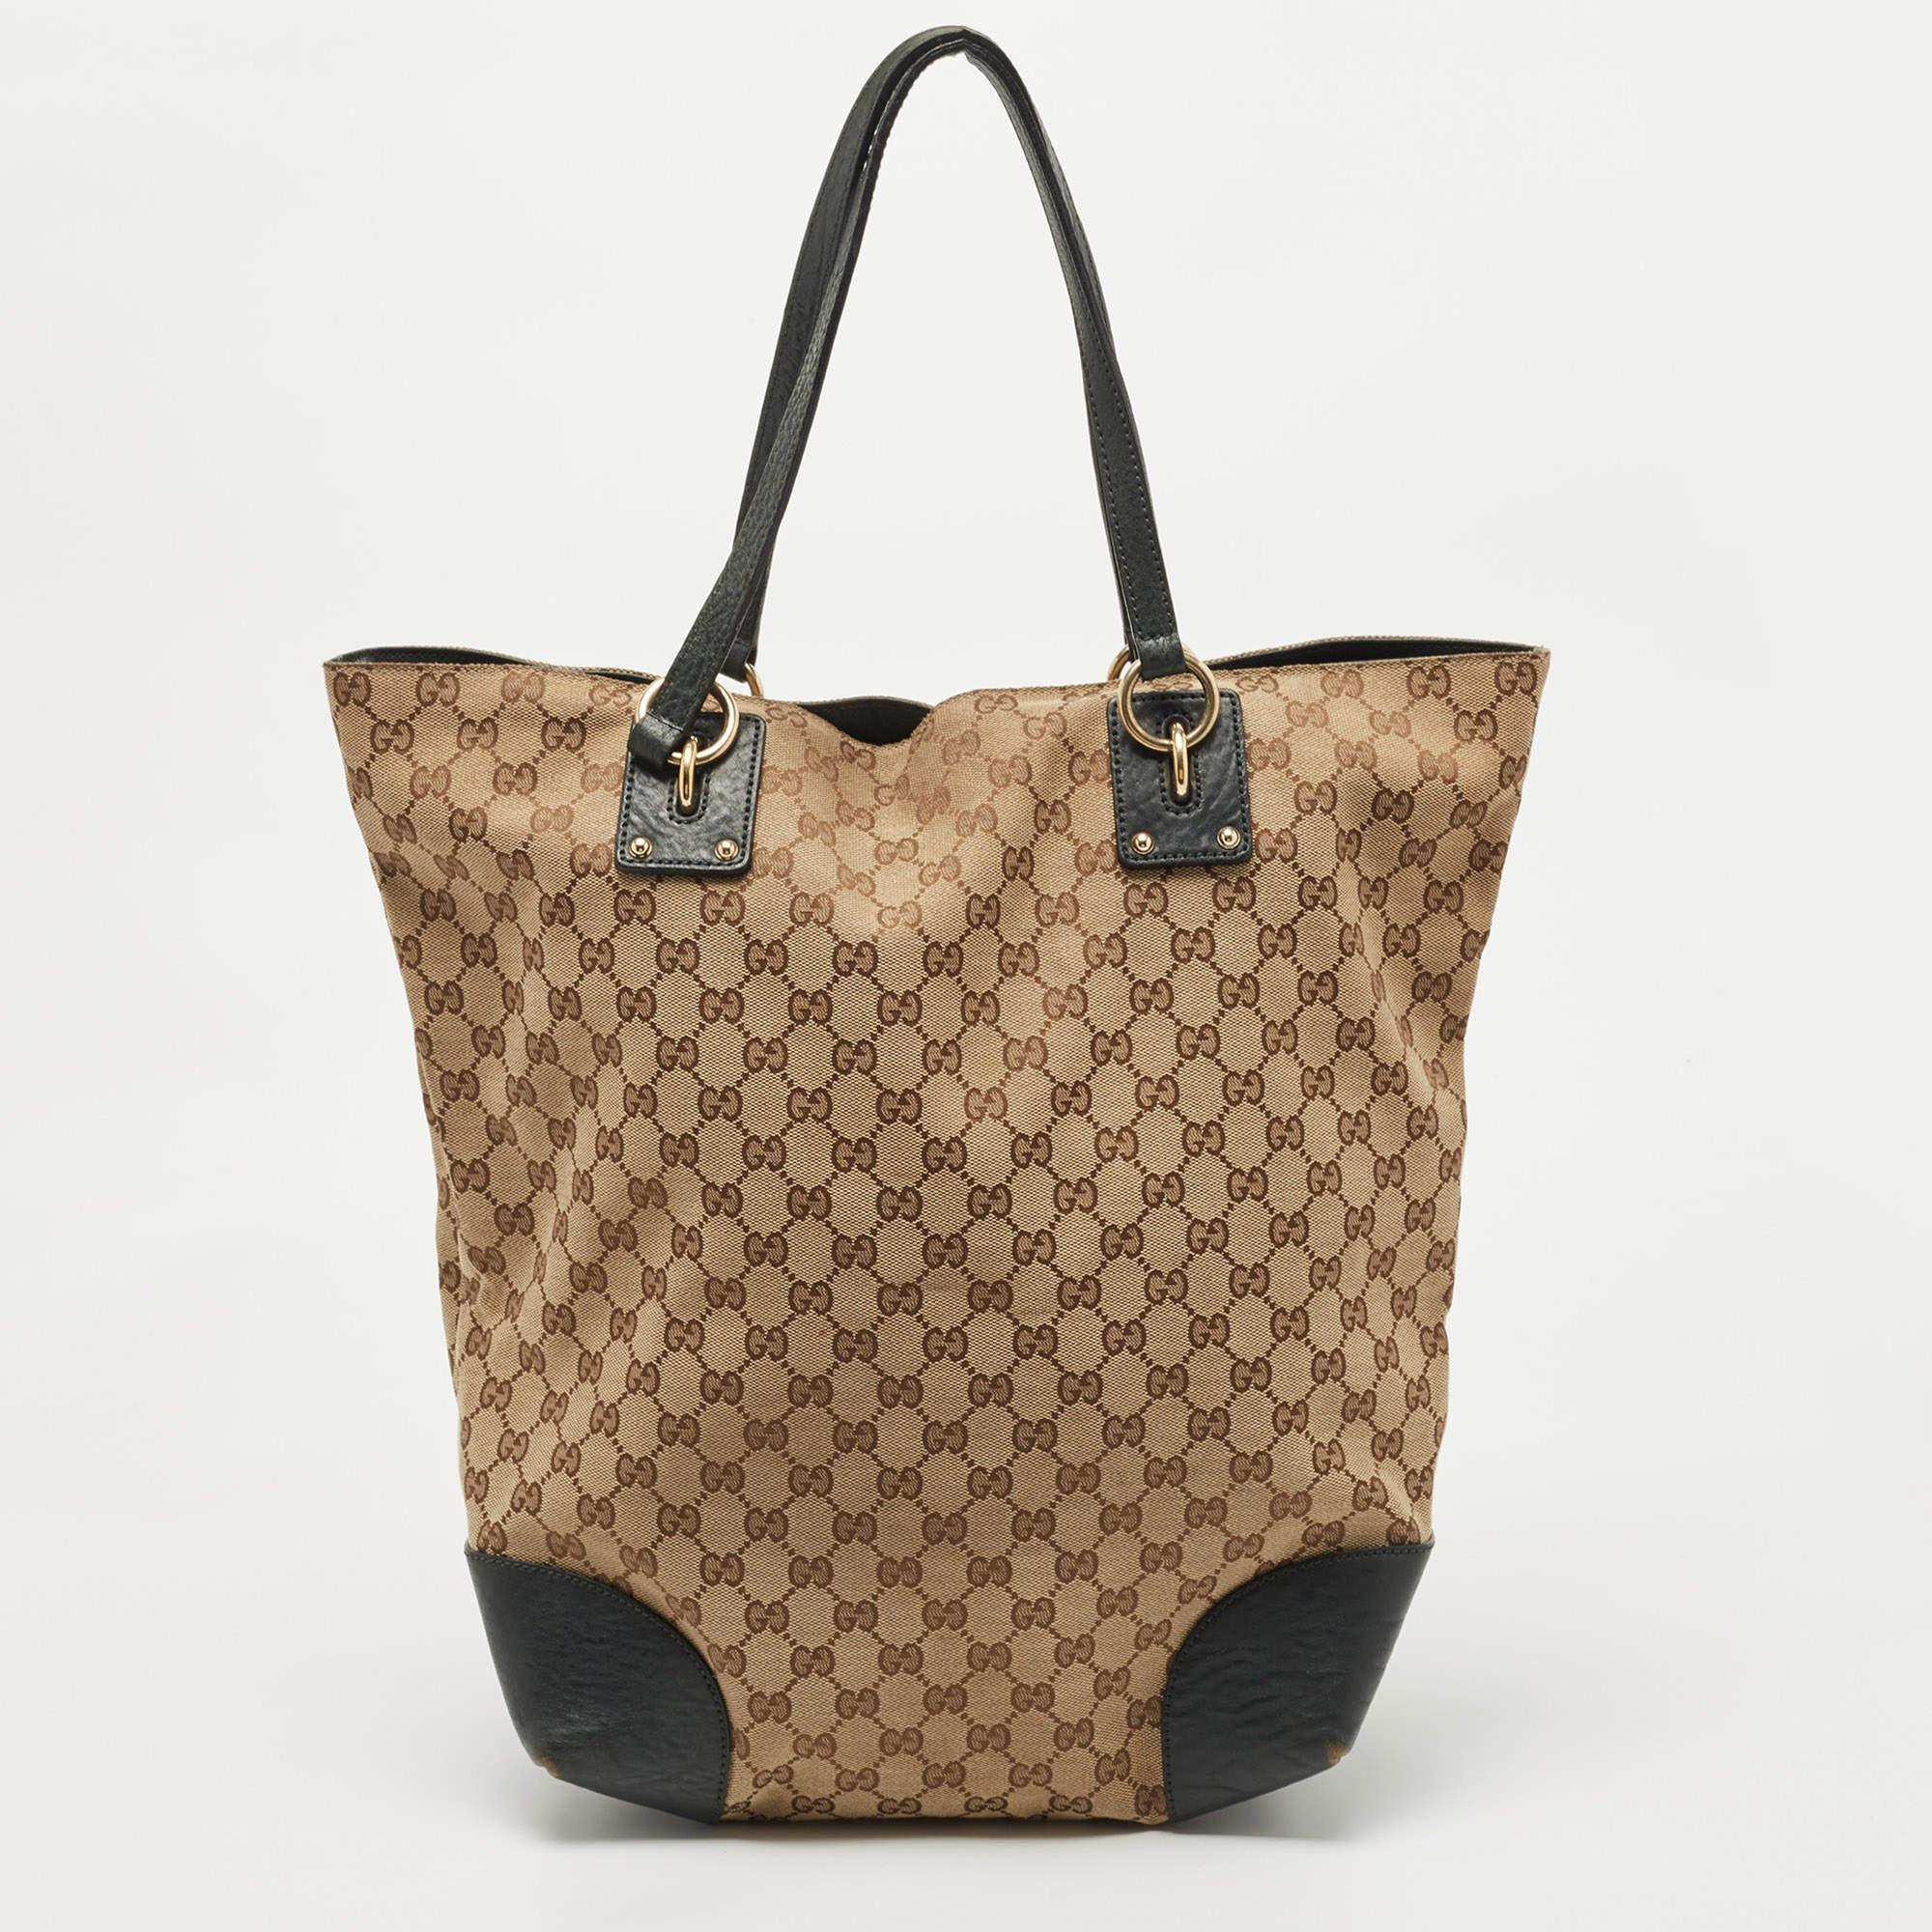 This Gucci accessory is an example of the brand's fine designs that are skillfully crafted to project a classic charm. It is a functional creation with an elevating appeal.

